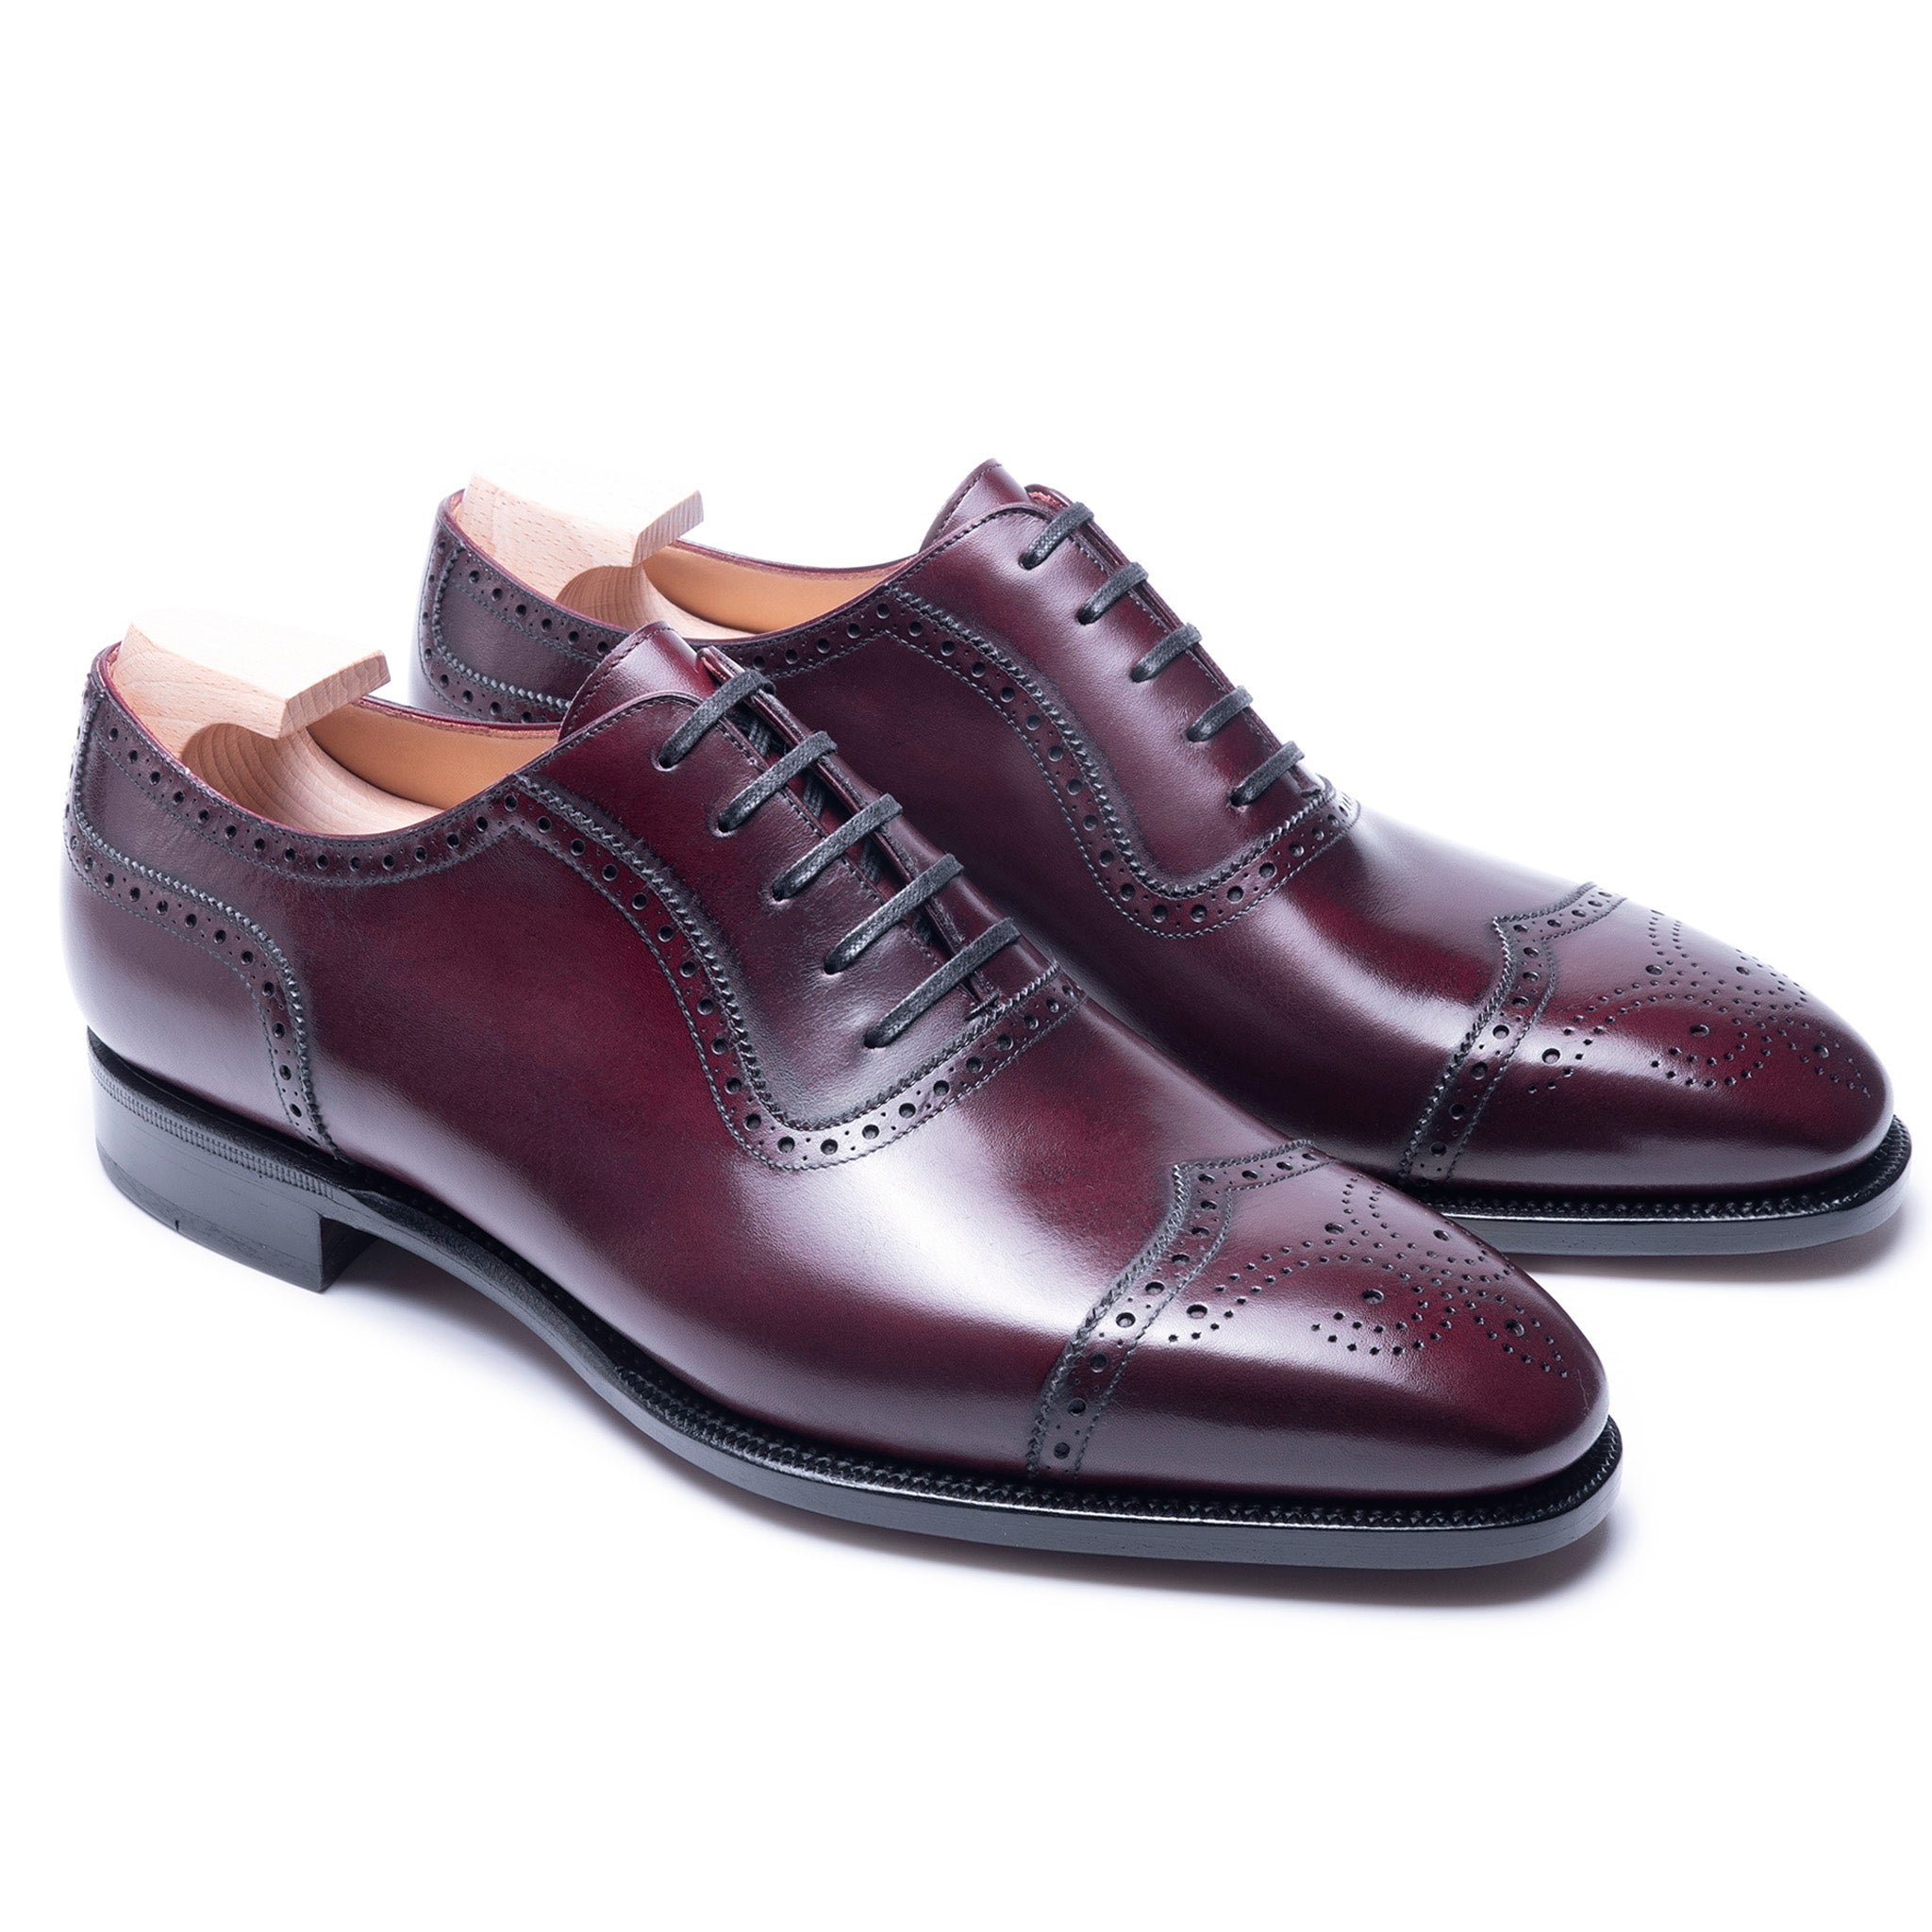 TLB Mallorca | Men's leather shoes | Oxford Shoes Artista Collection |  model Picasso vegano Burgundy 269